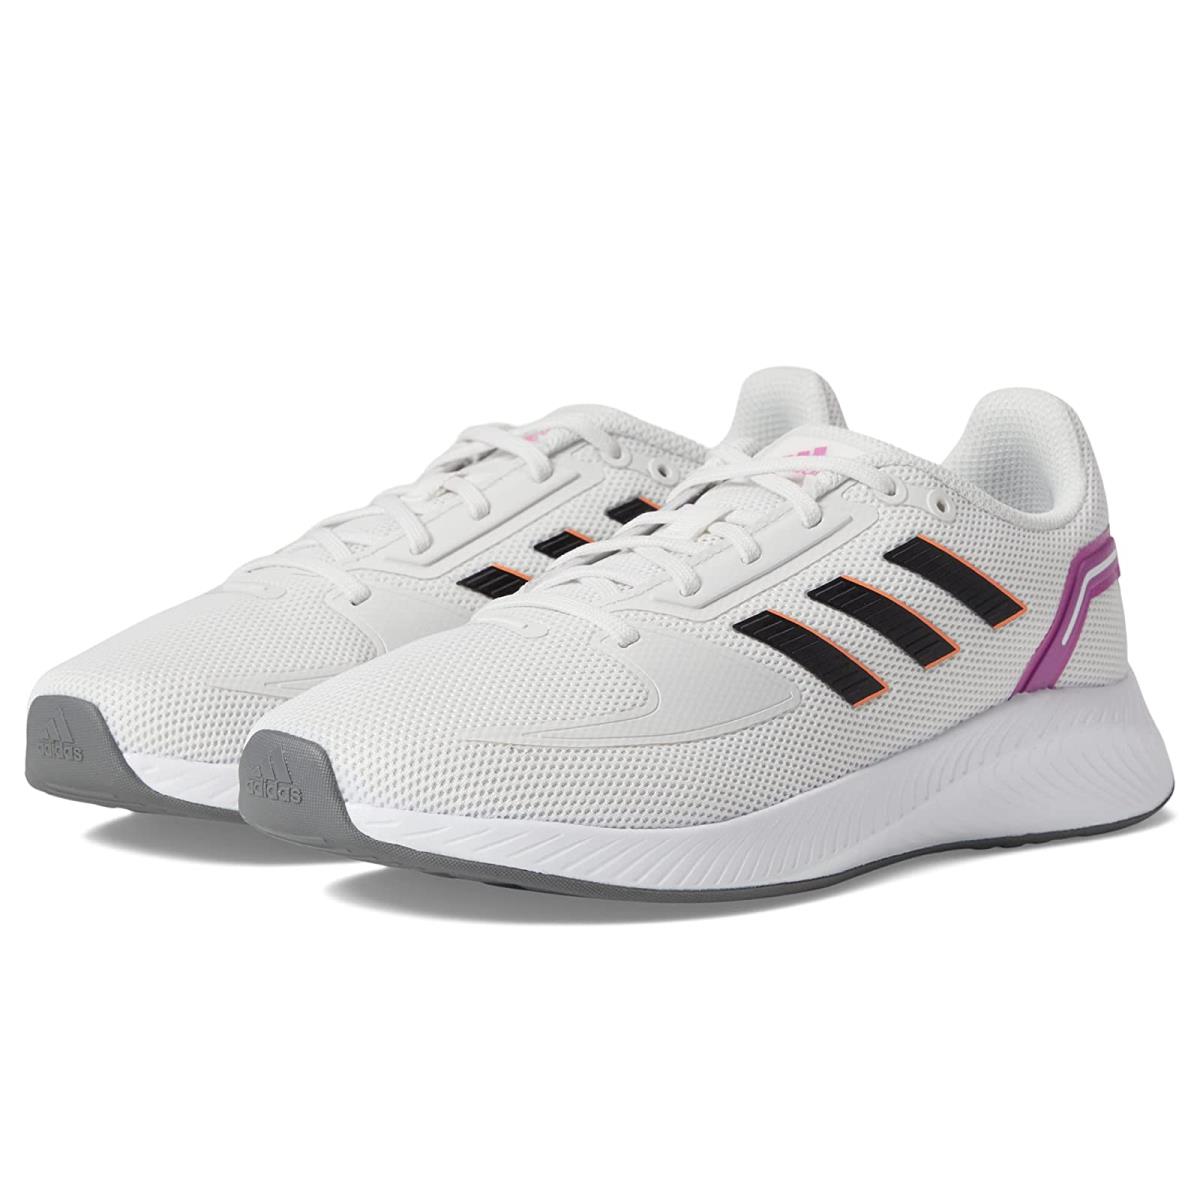 Woman`s Sneakers Athletic Shoes Adidas Running Runfalcon 2.0 Crystal White/Black/Grey